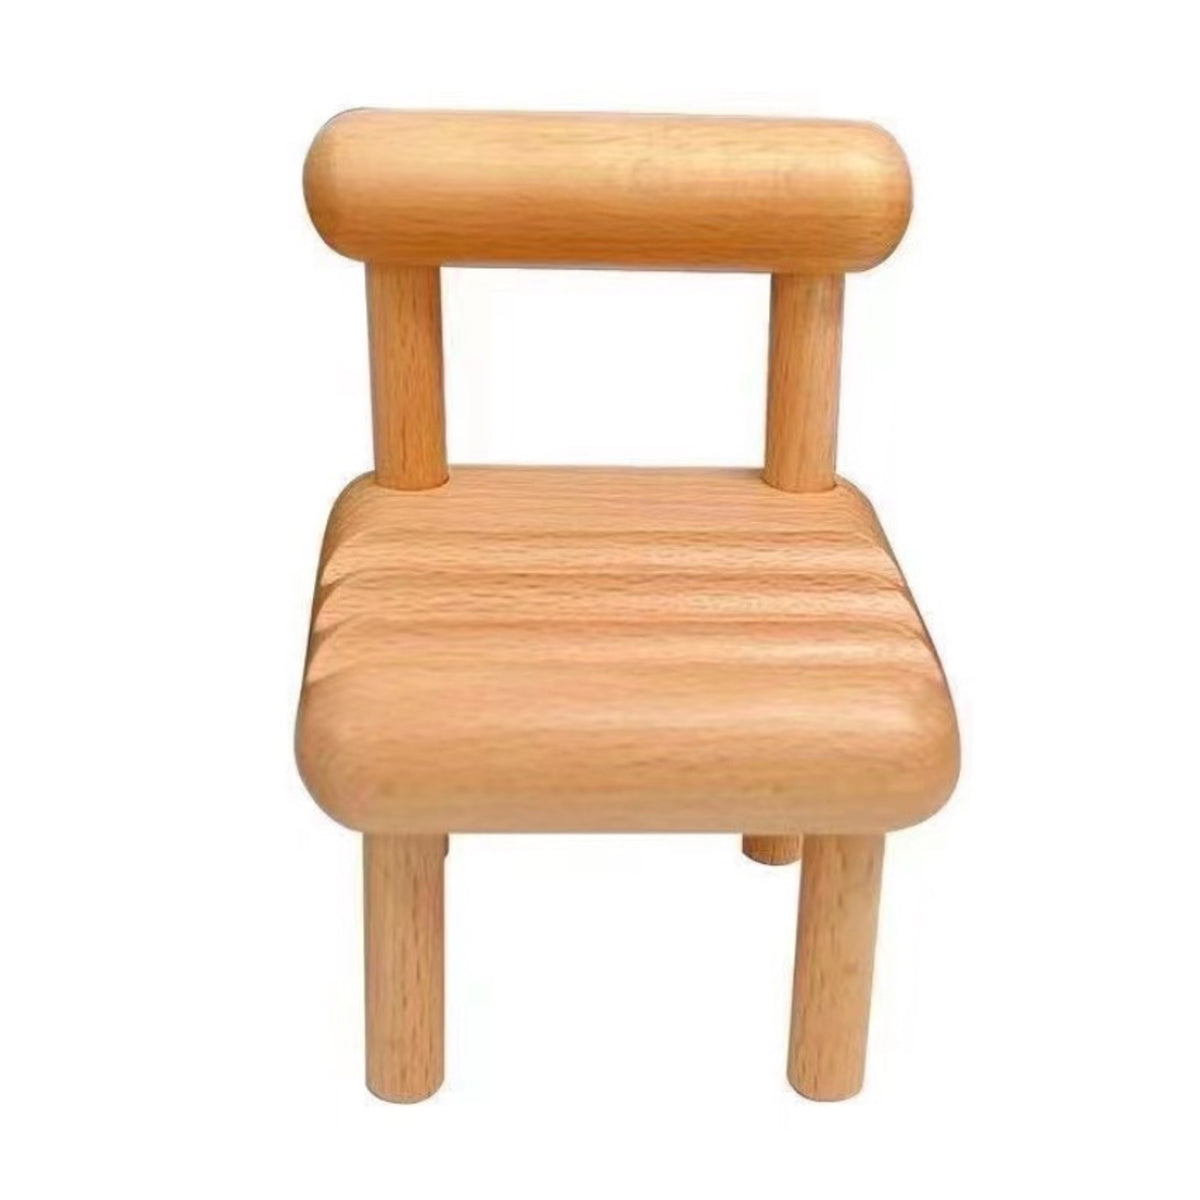 Pre-order| Natural Wood Mini Chair Phone Stand HedeliE